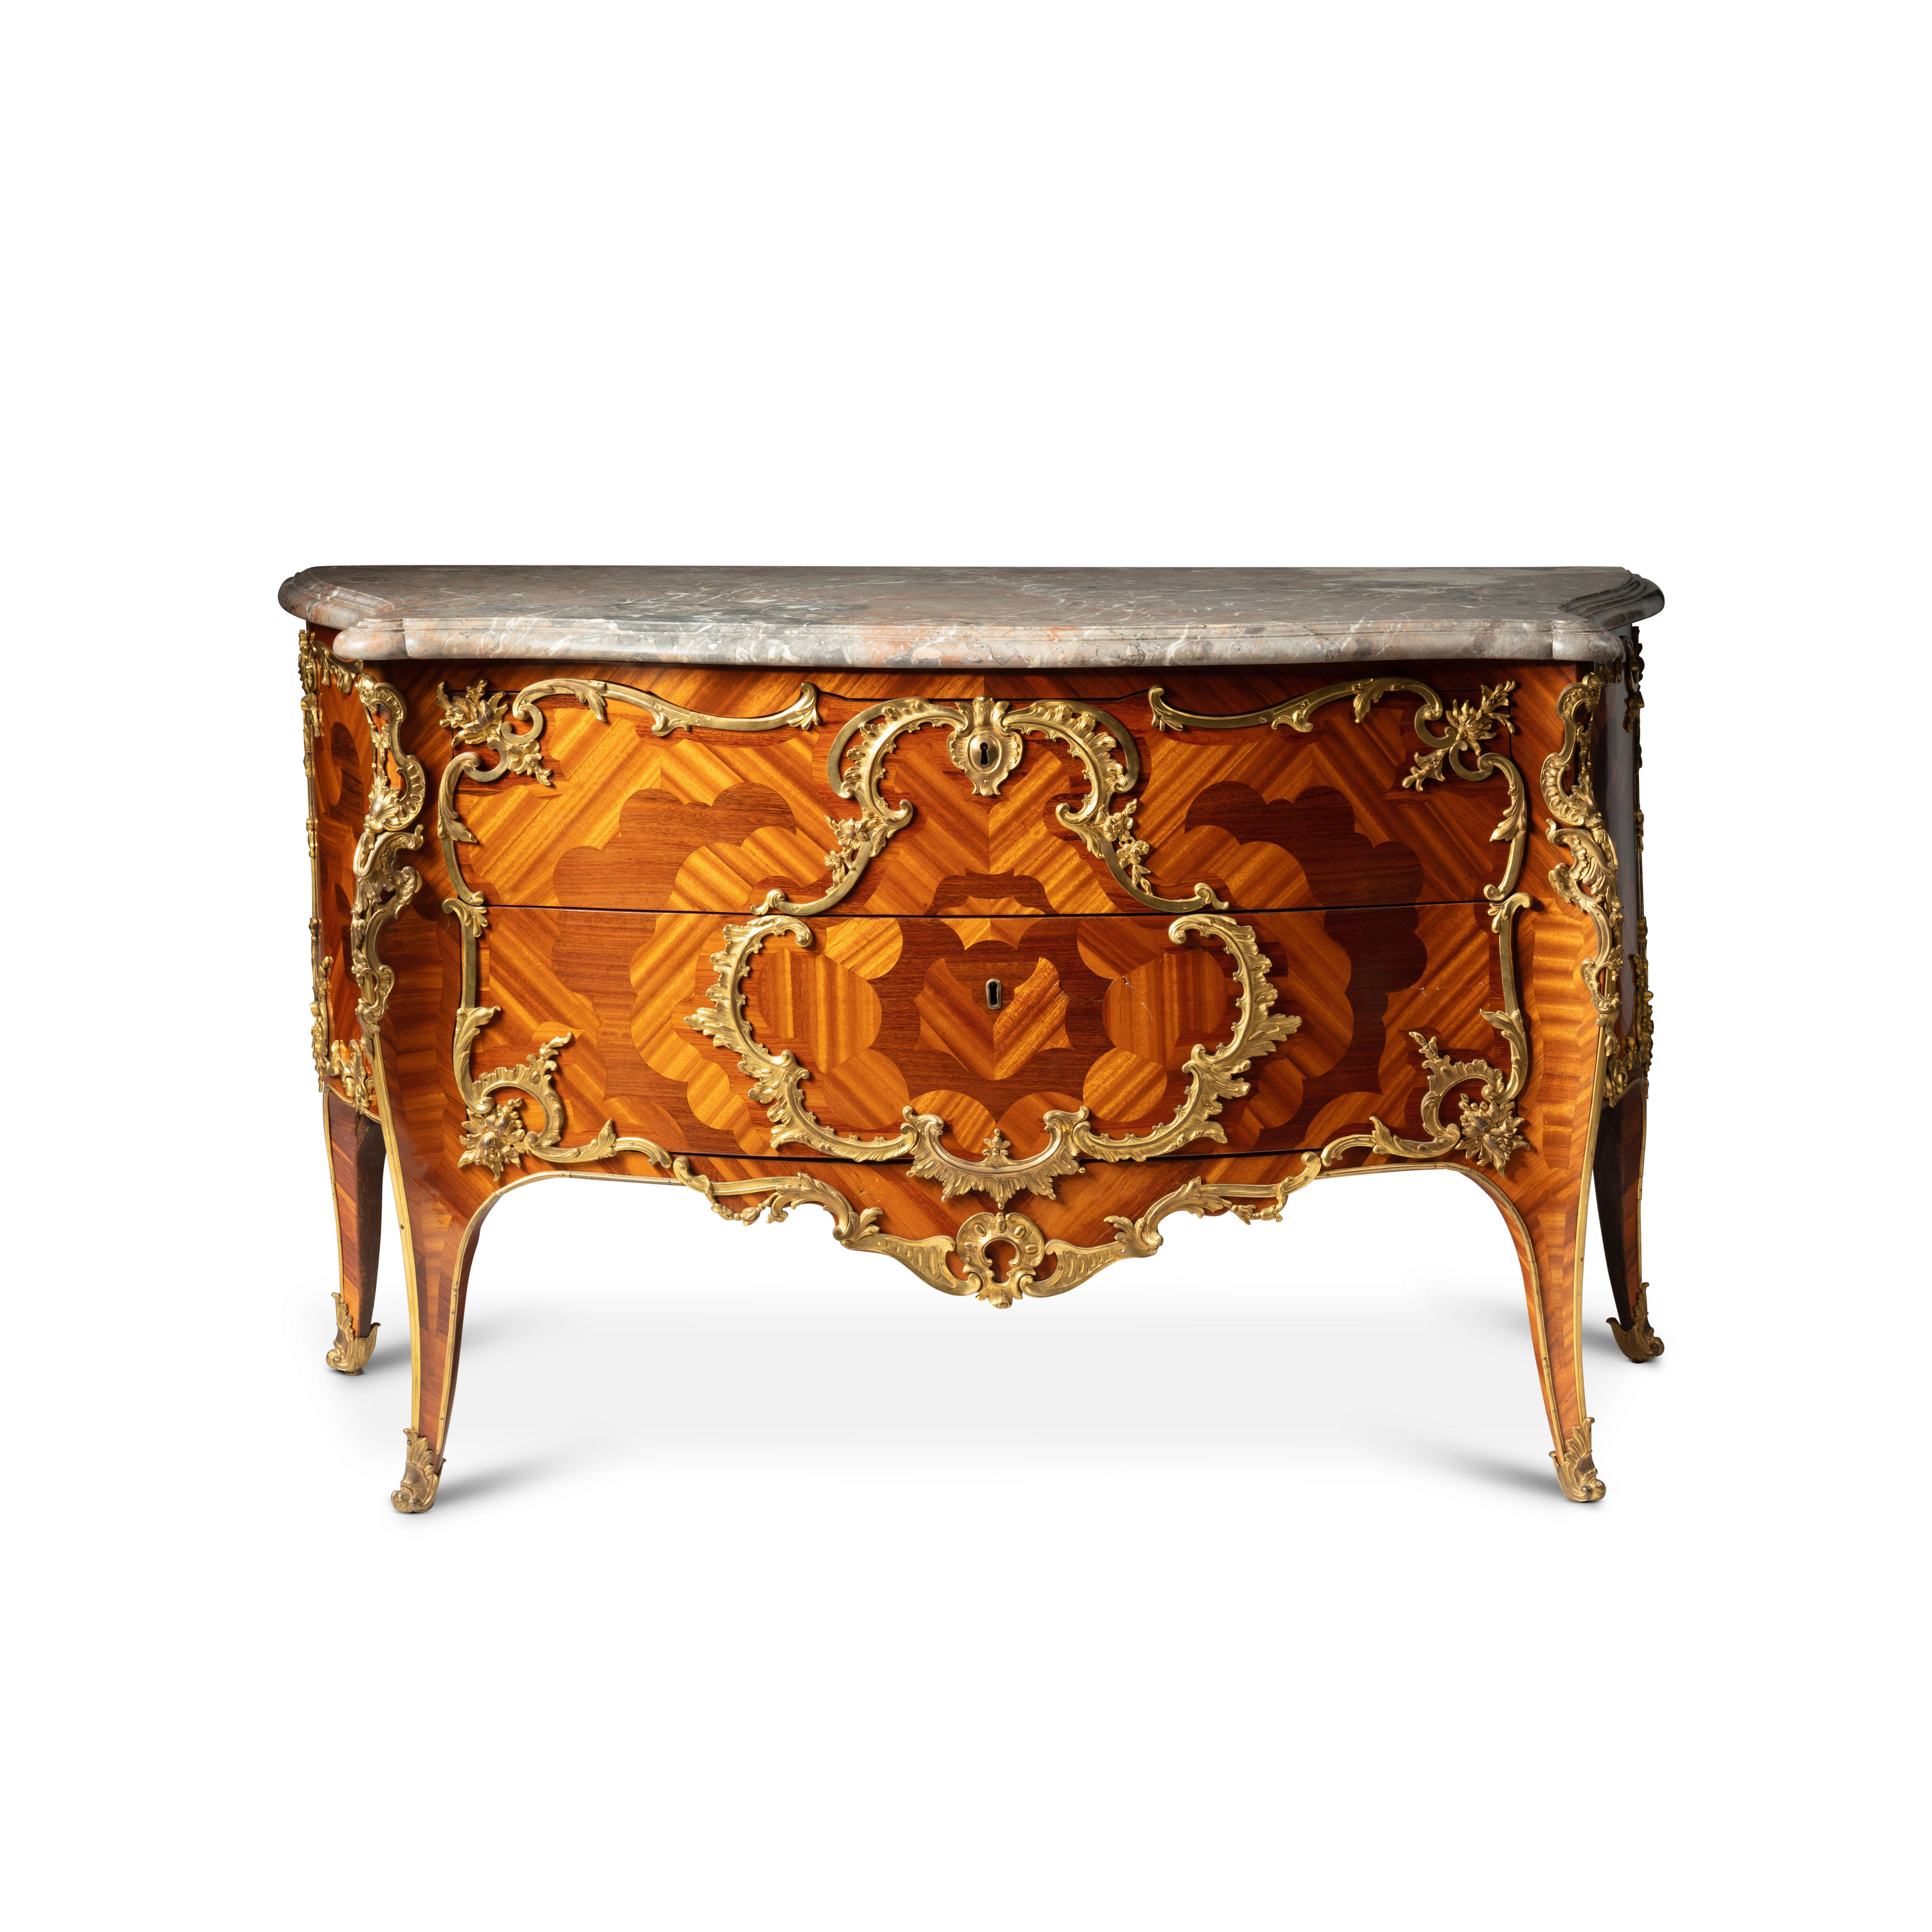 A Louis XV gilt-bronze mounted satinwood and amaranth veneered commode, circa 1750, stamped by BVRB, - Image 3 of 11